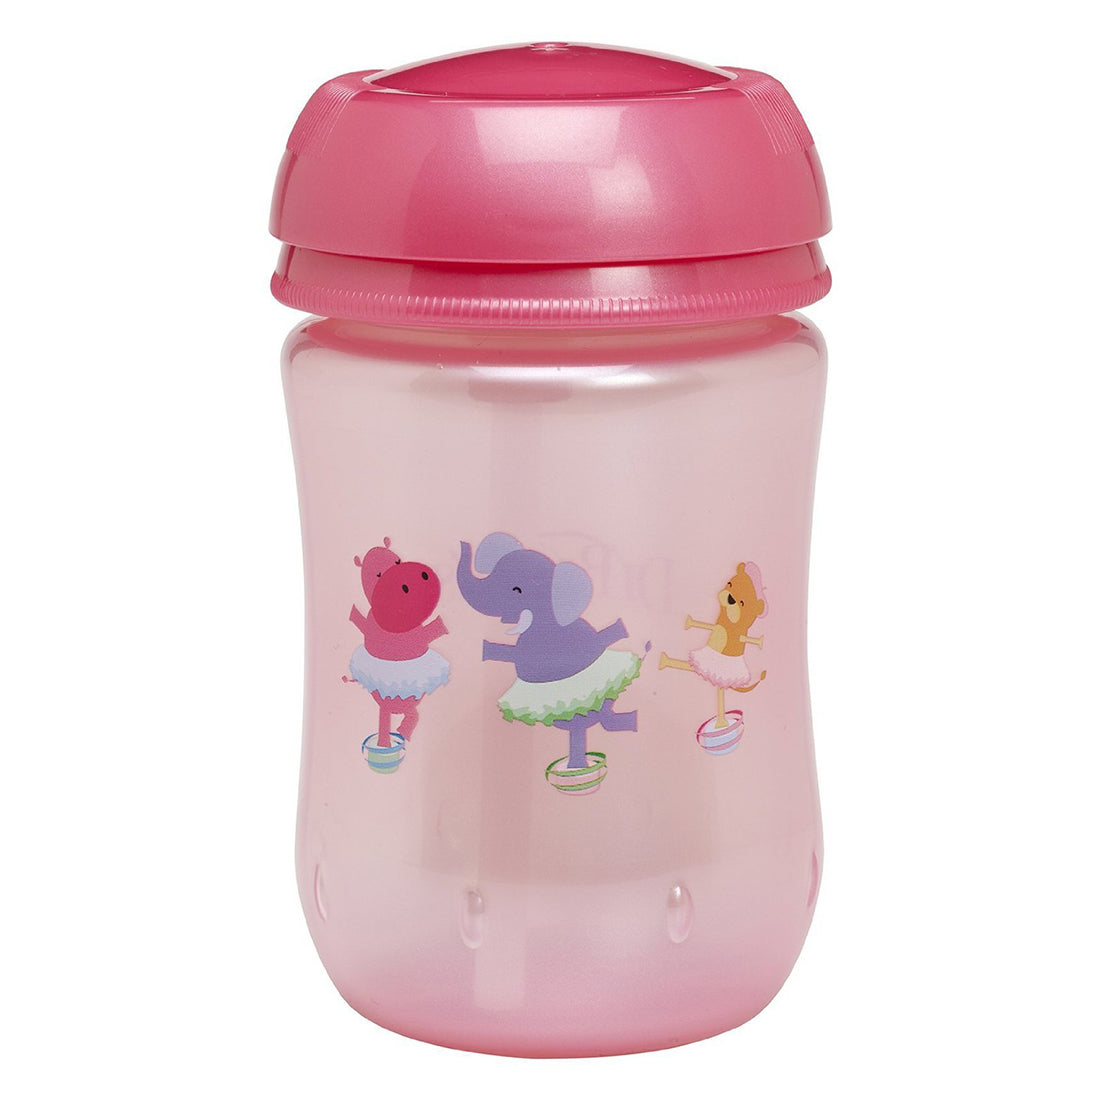 Straw Cup 12 Oz / 355 Ml-Pink & Pink Top